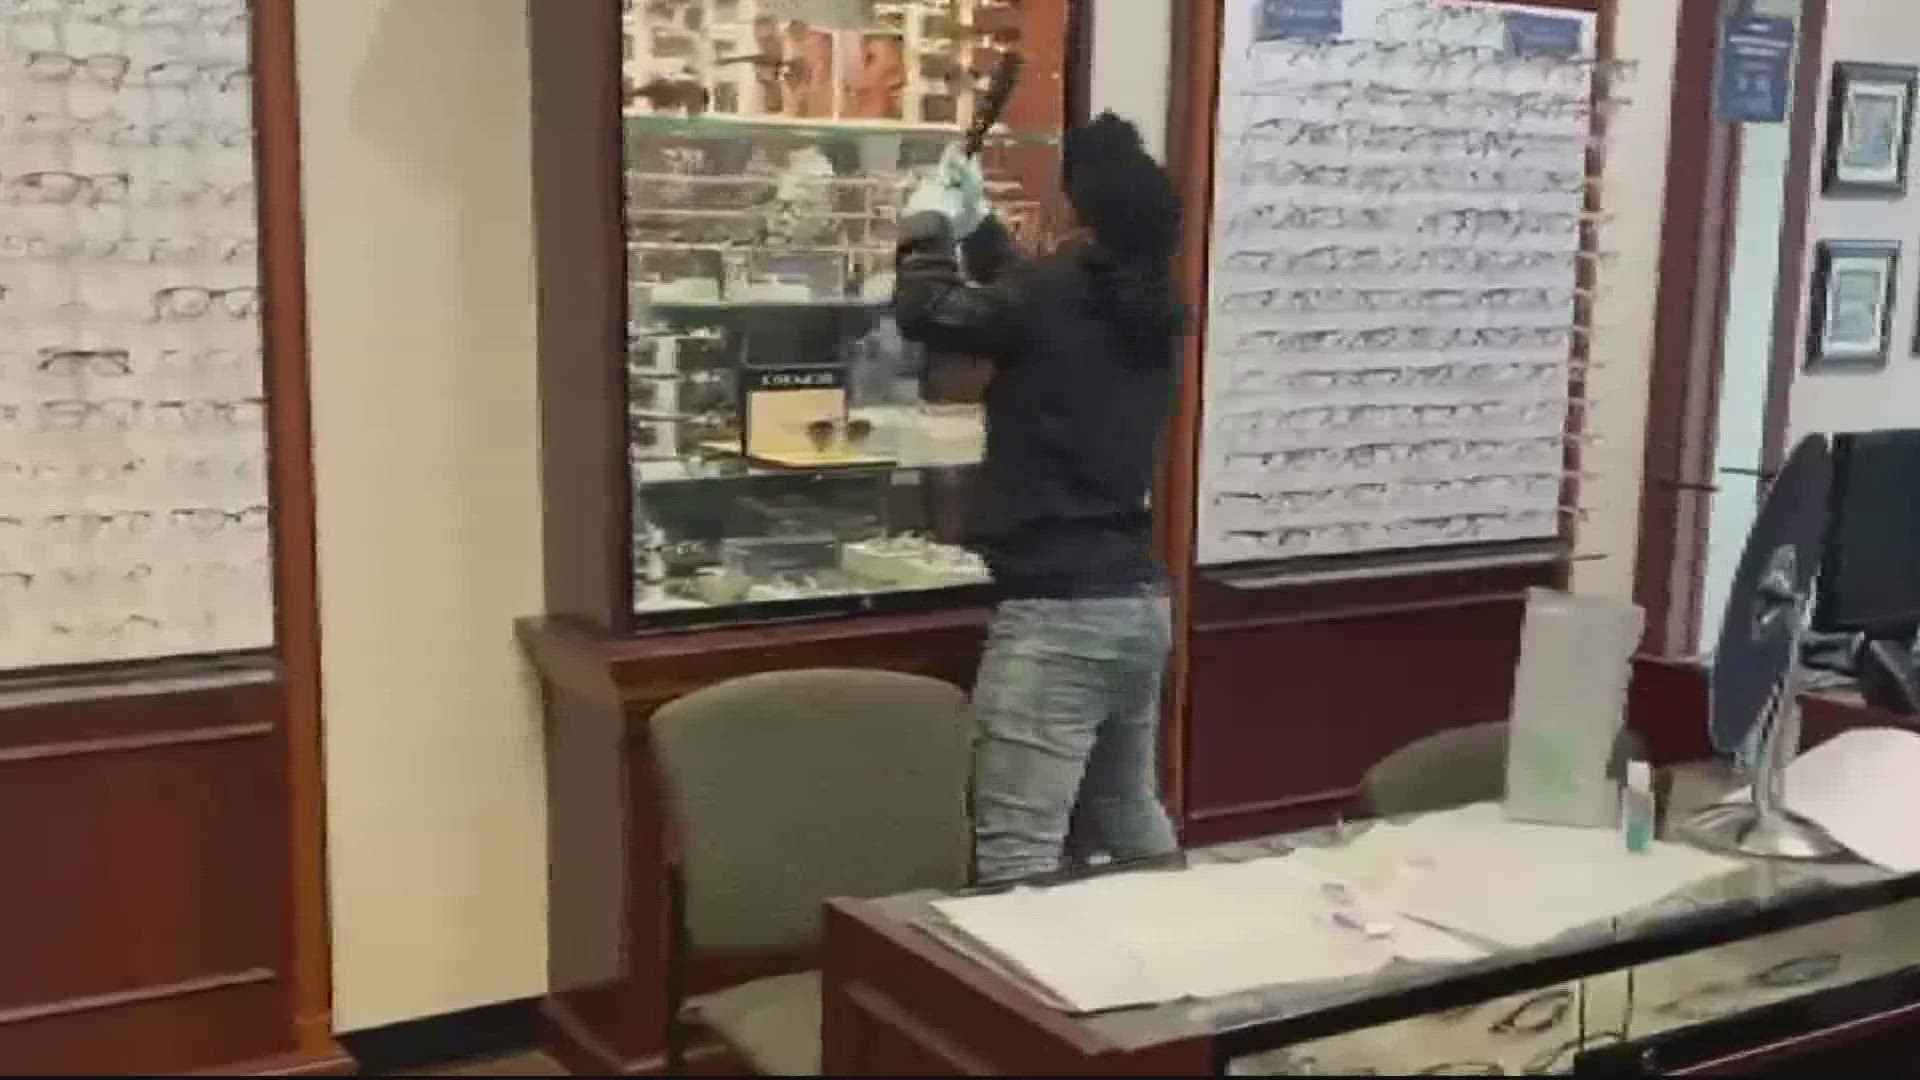 My Eye Doctor on 6307 Richmond Highway in Alexandria was burglarized. Employee Pedro Prudencio grabbed his phone and started rolling for evidence.